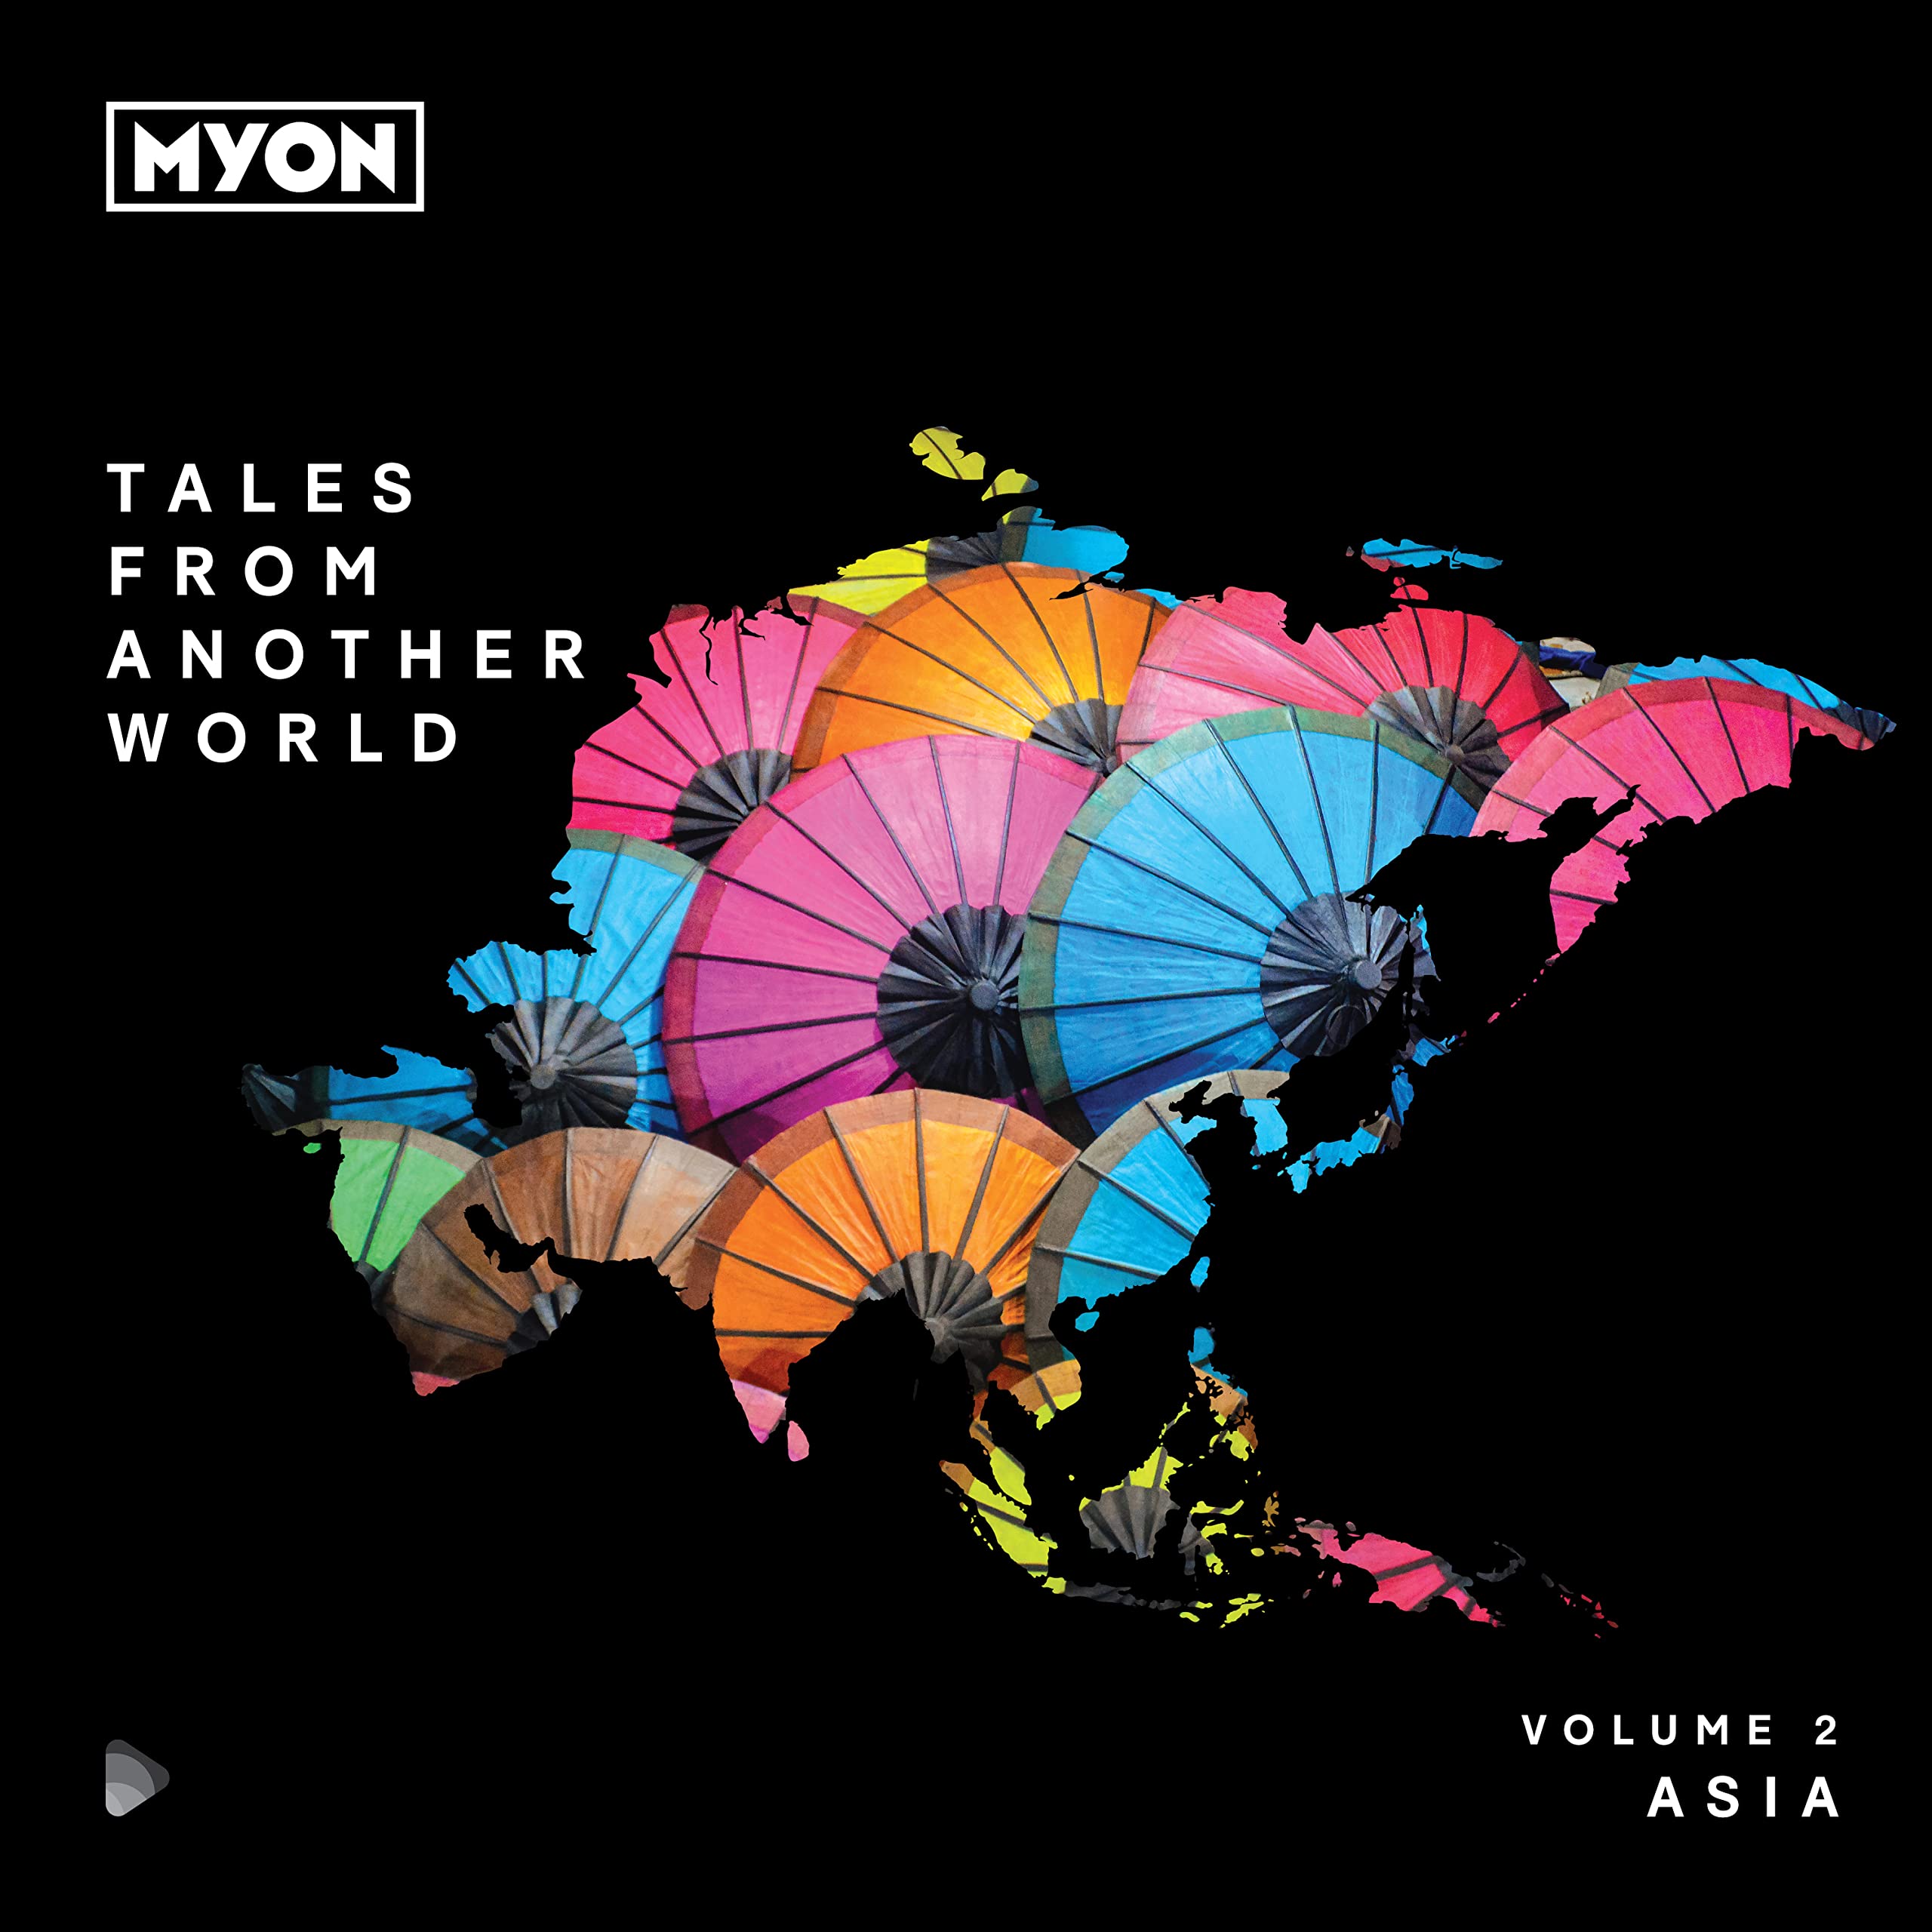 VA-Myon Tales From Another World Volume 02 Asia-(BHCD232)-3CD-FLAC-2022-WRE